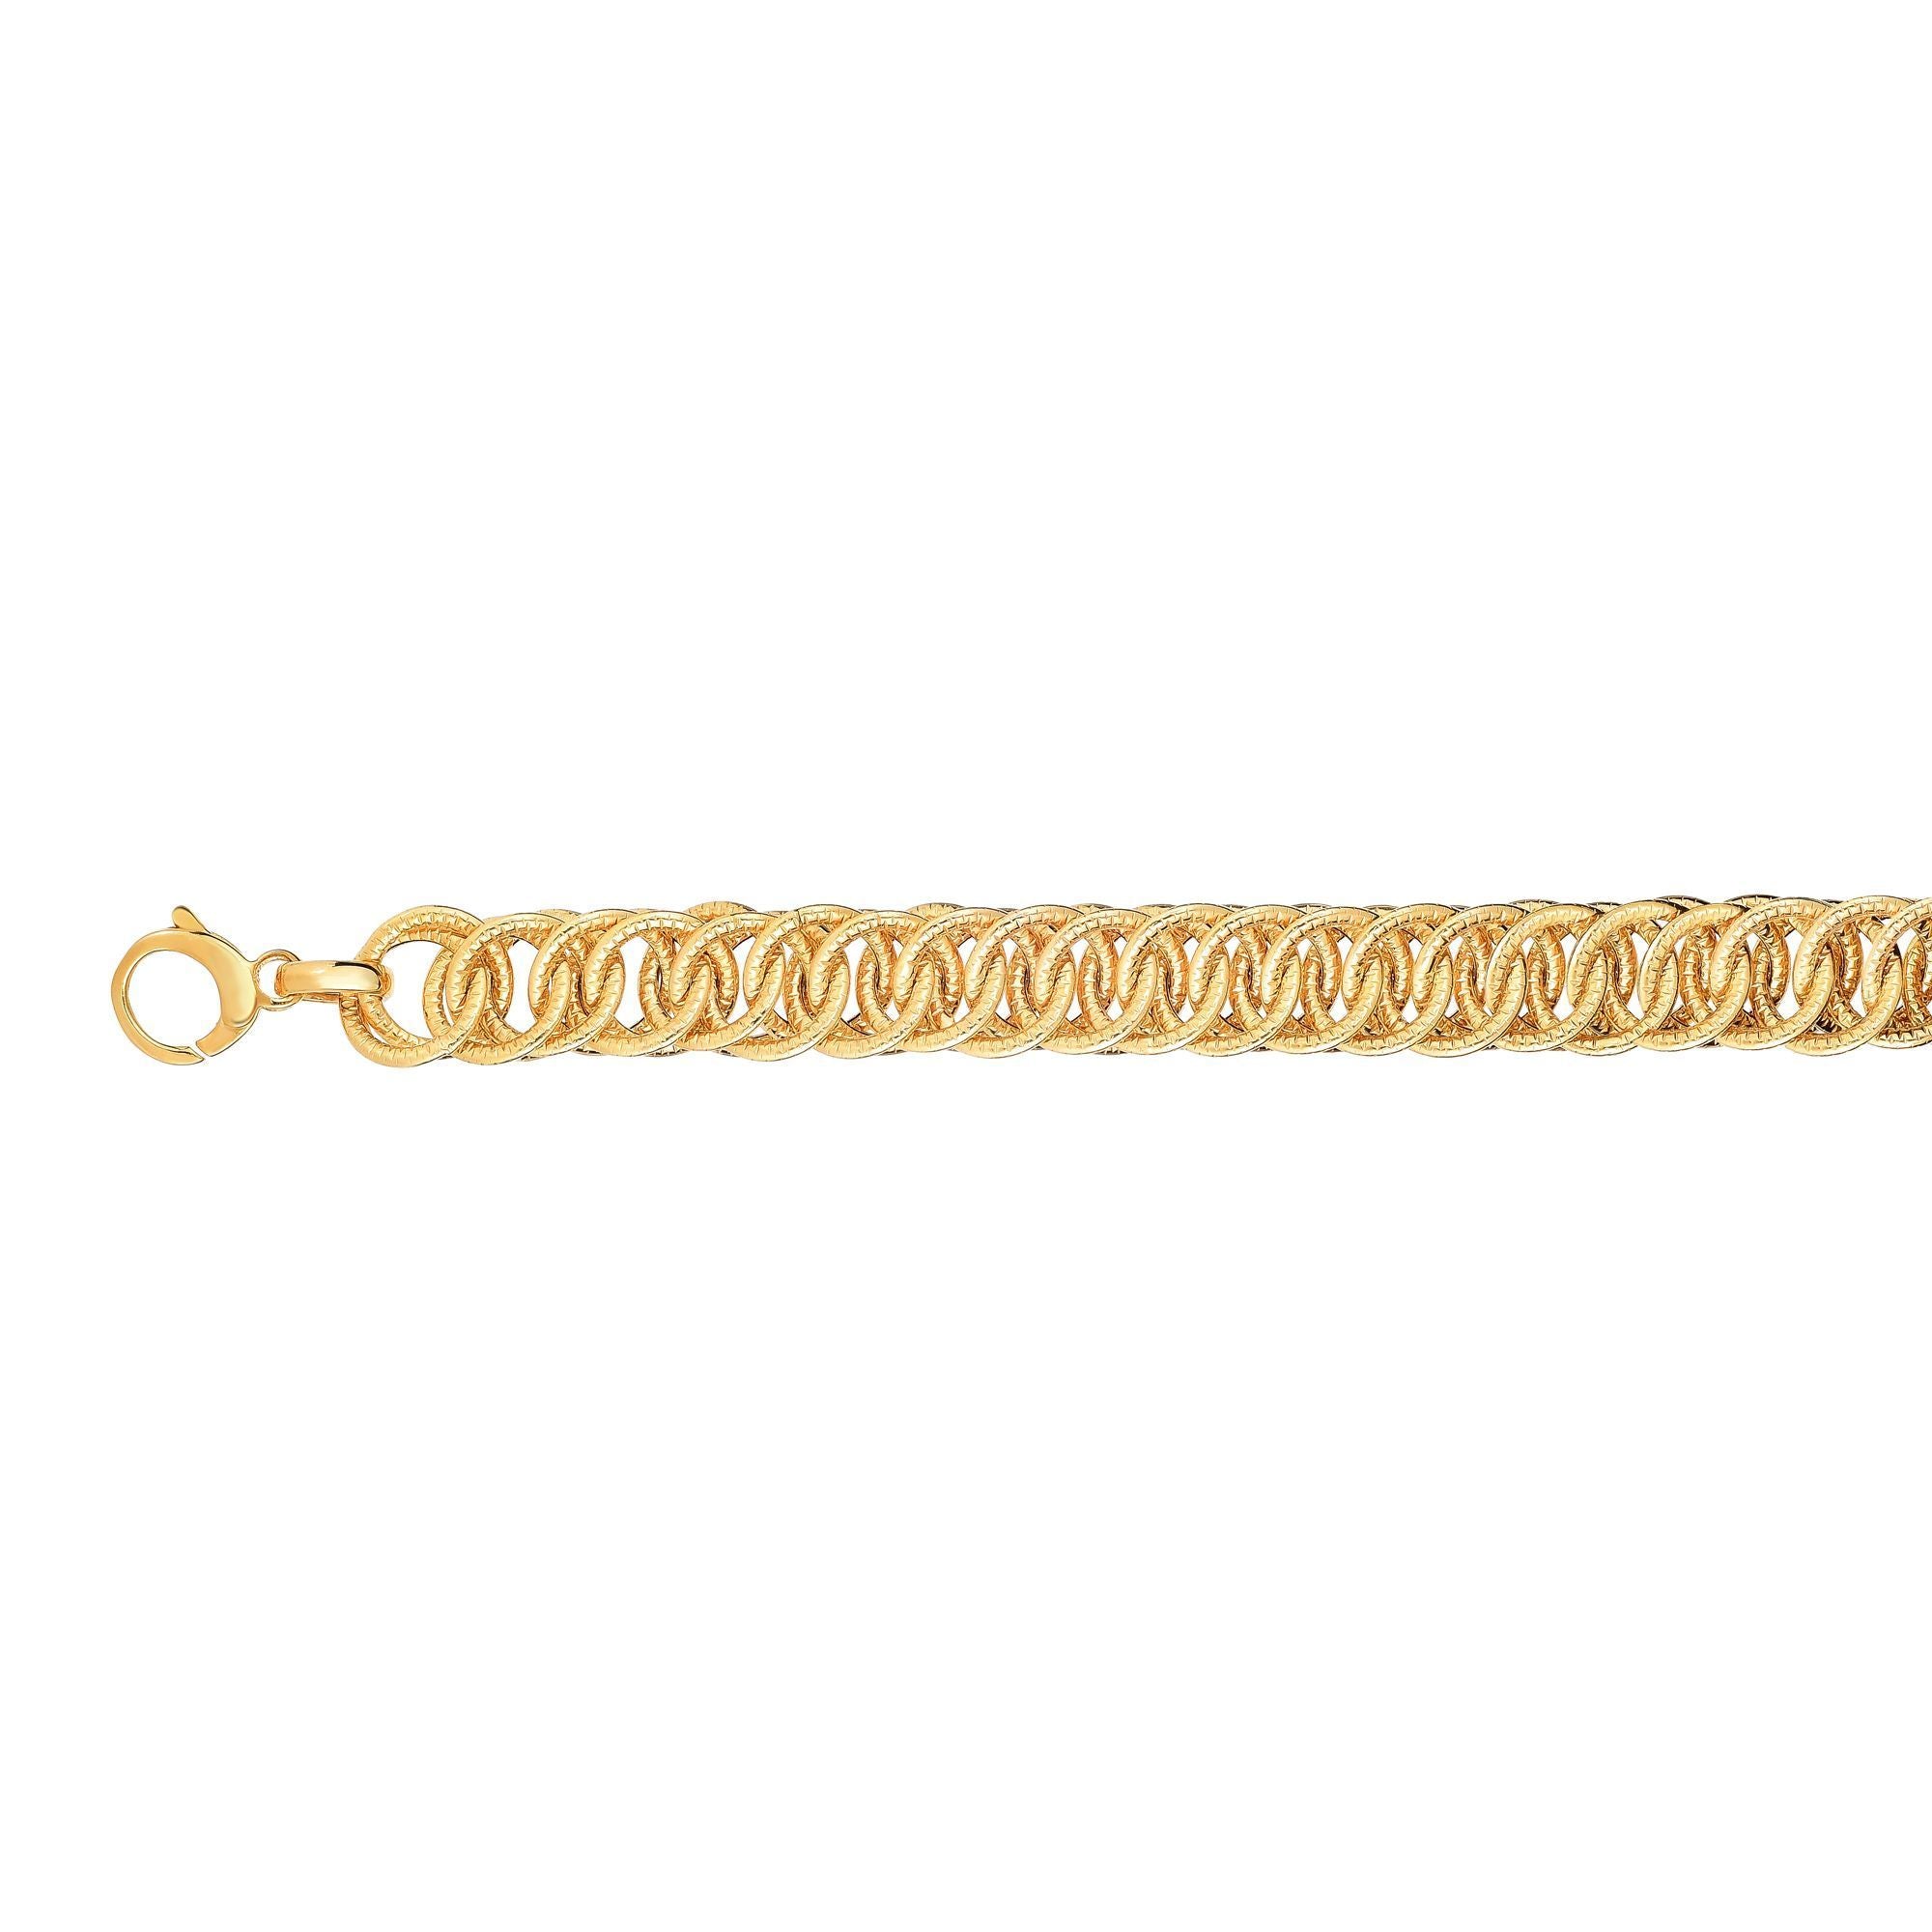 14k Yellow Gold Double Round Woven Link Fancy Bracelet, 7.75" fine designer jewelry for men and women